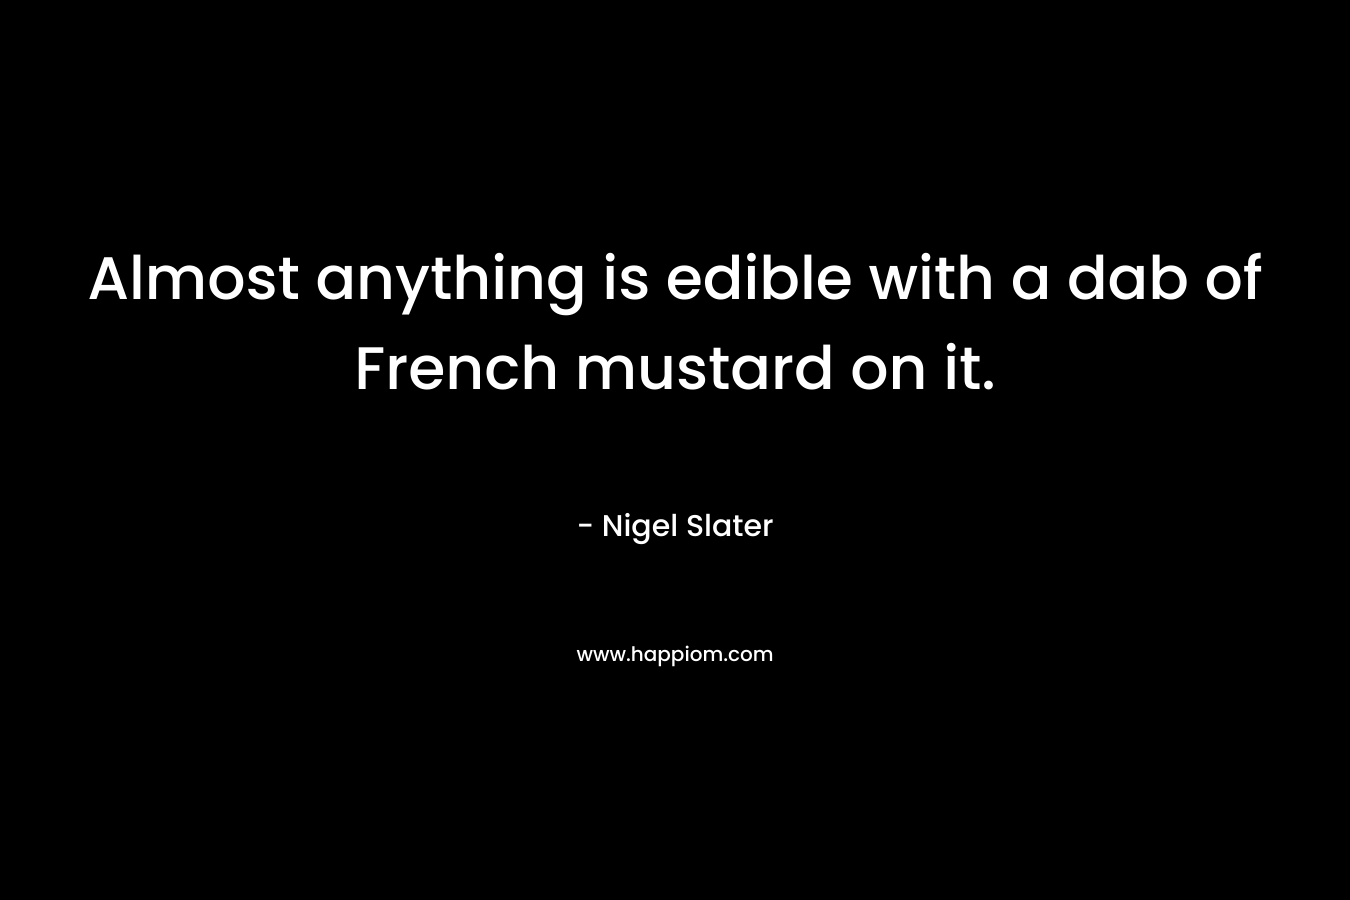 Almost anything is edible with a dab of French mustard on it.